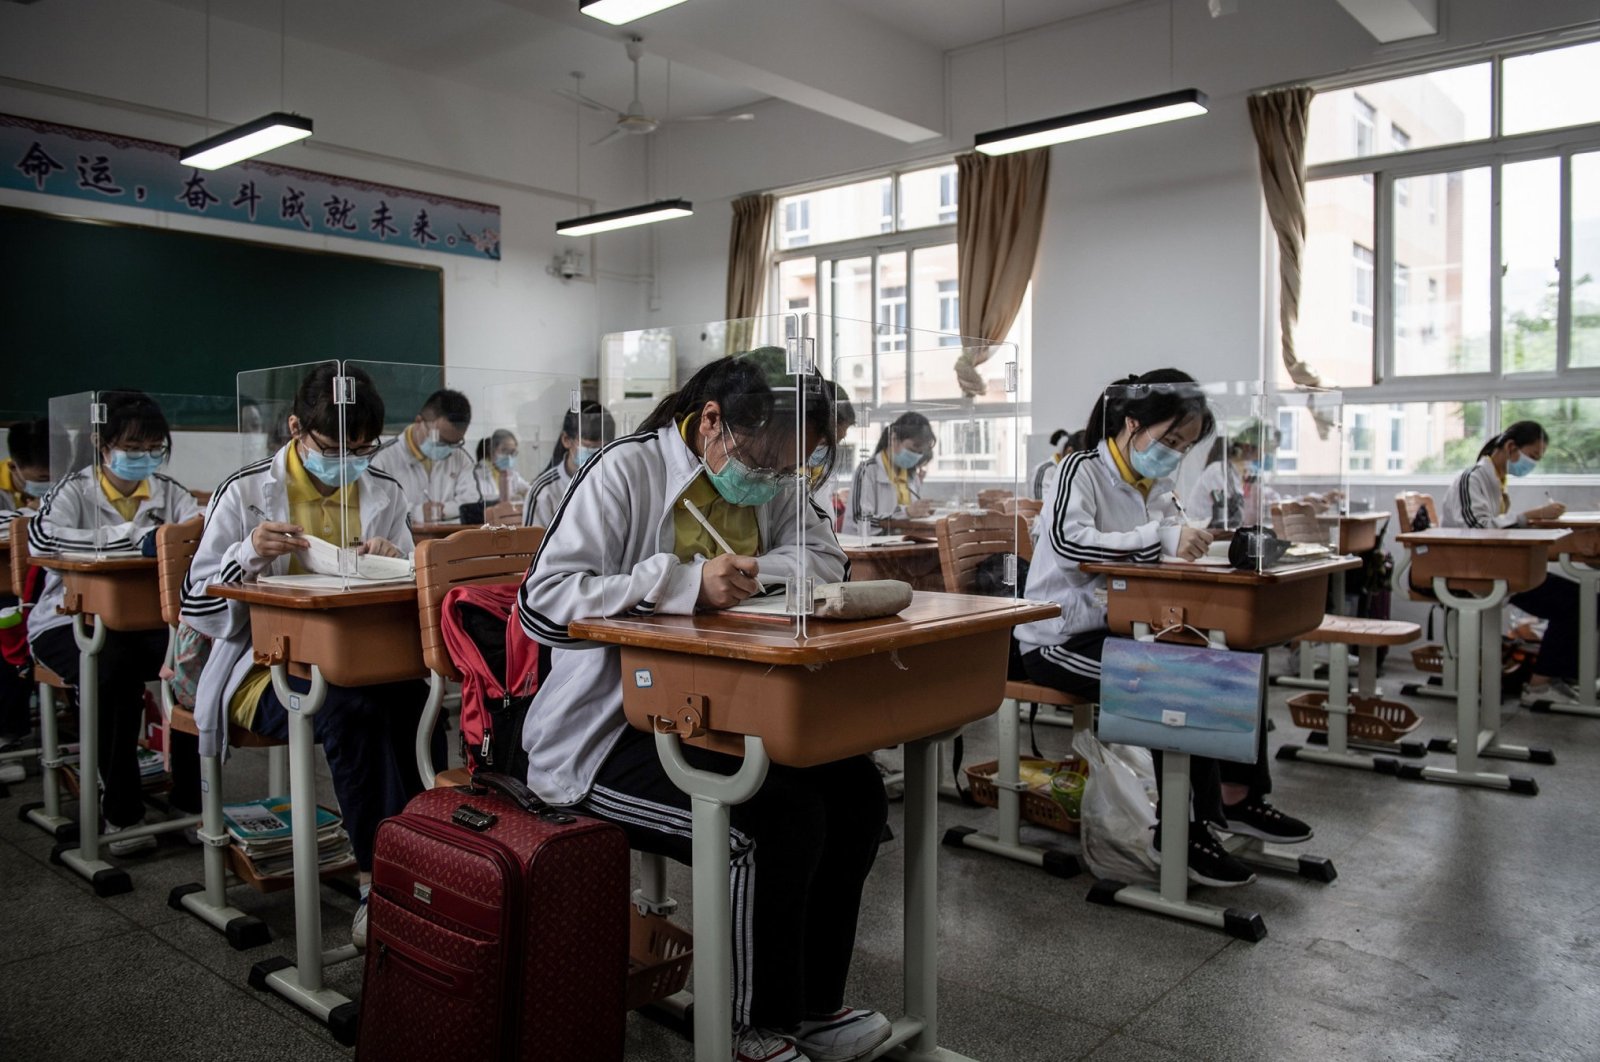 High school senior students study in a classroom, in Wuhan, China, May 6, 2020. (AFP Photo)